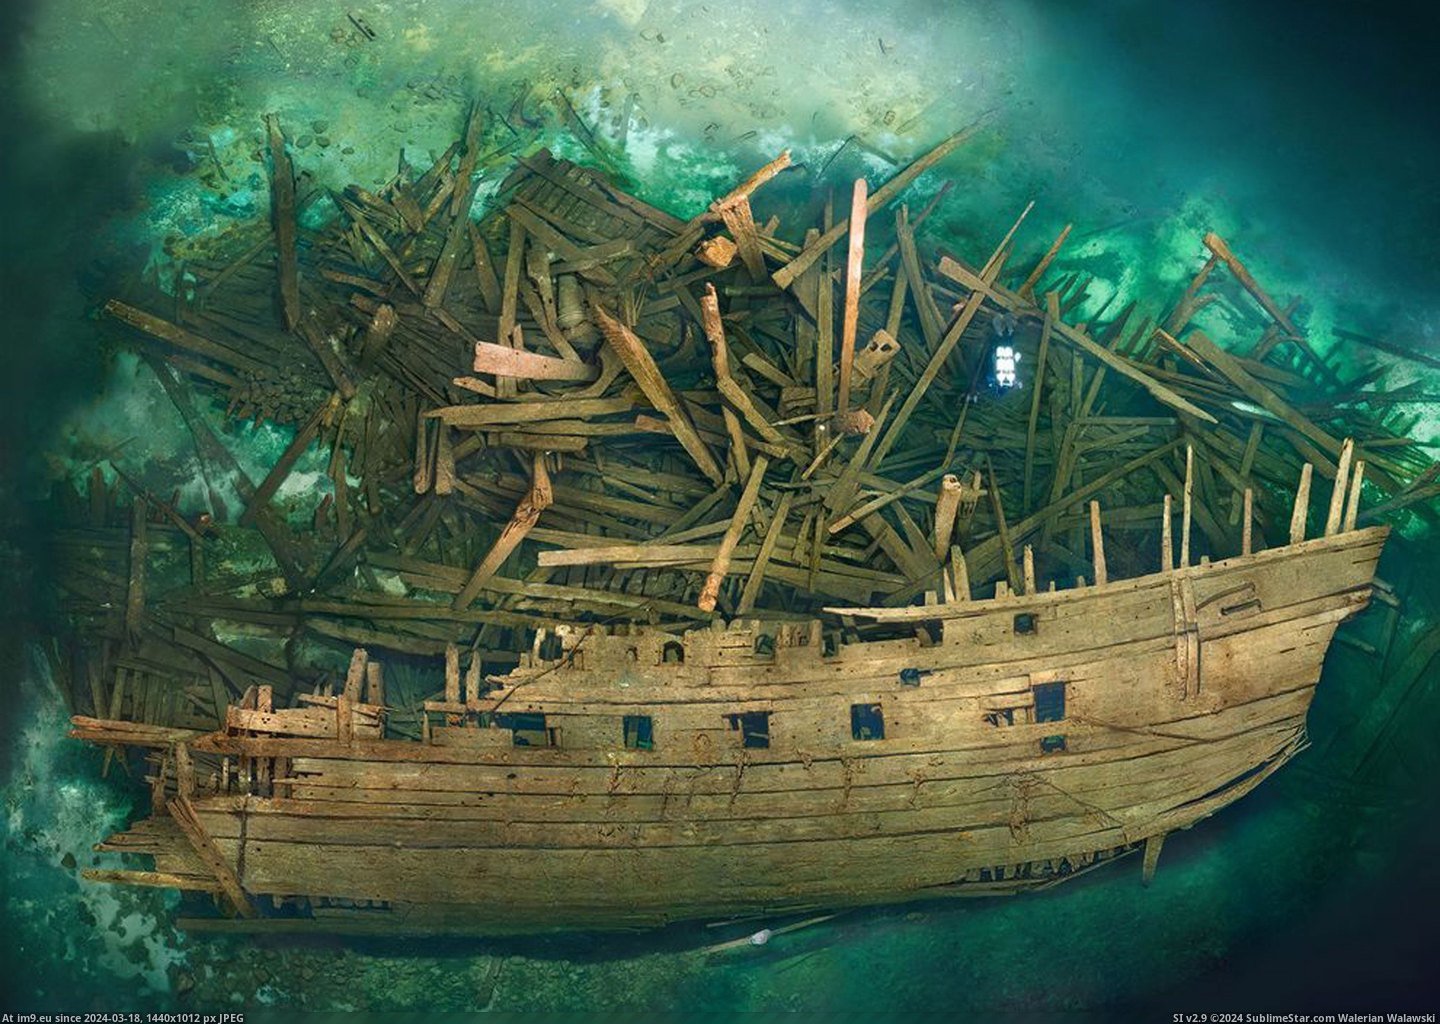 #Years #Pretty #Battle #Exploded #Wreck #Preserved #Warship #Land #Mars #Swedish [Pics] Wreck of the Swedish warship Mars, which exploded during the first battle of Öland. Pretty well preserved for 500 years u Pic. (Image of album My r/PICS favs))